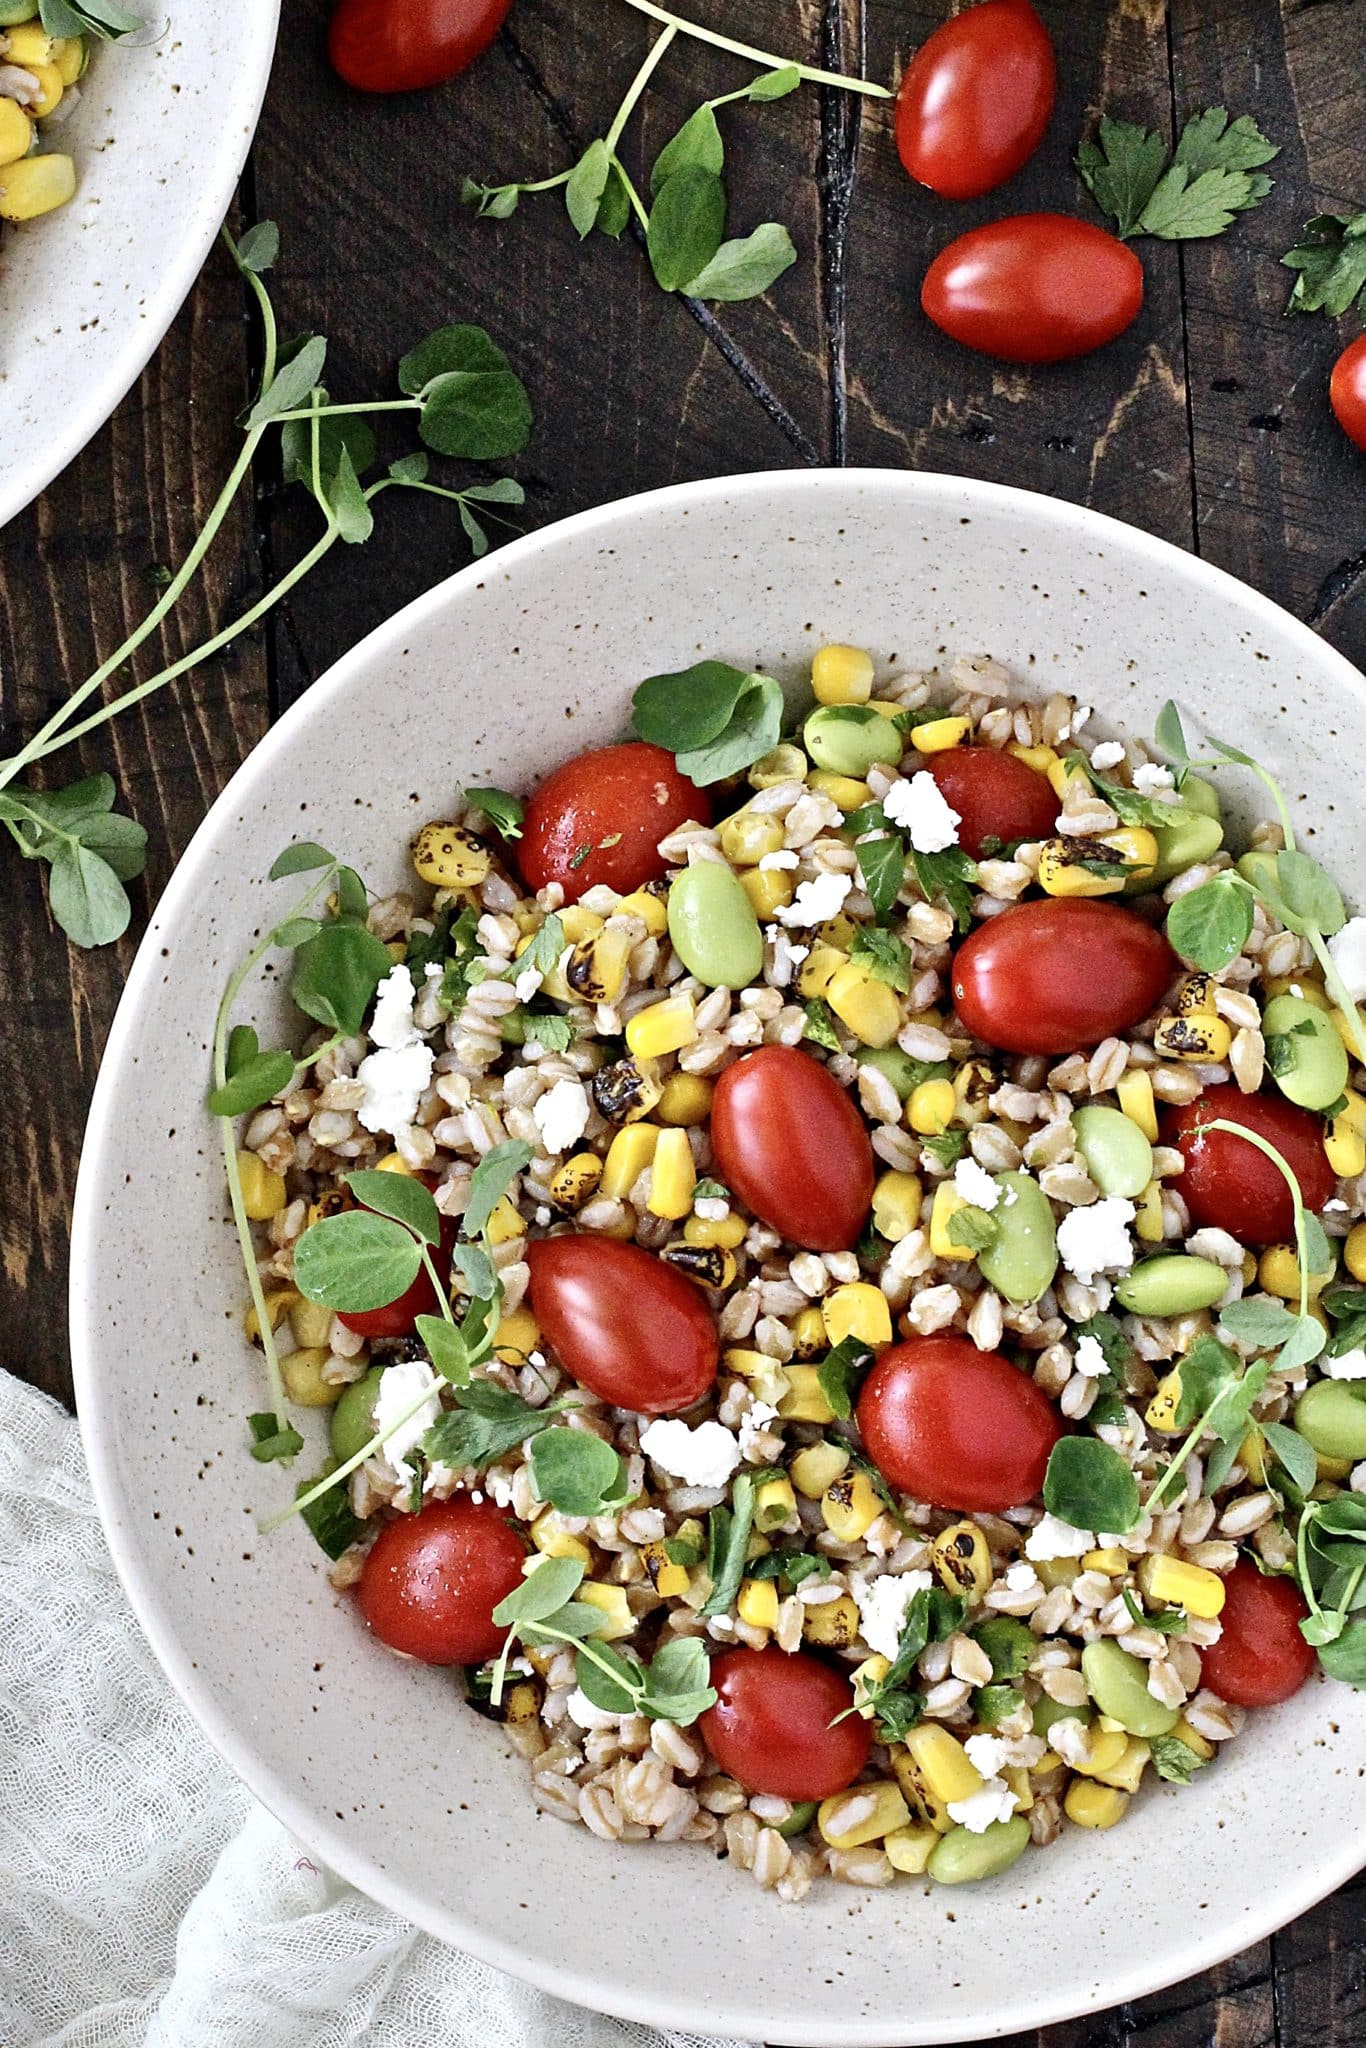 Everything you need to know about whole grains along with the recipe for this healthy and flavorful Farro Salad with Corn, Tomatoes and Edamame.